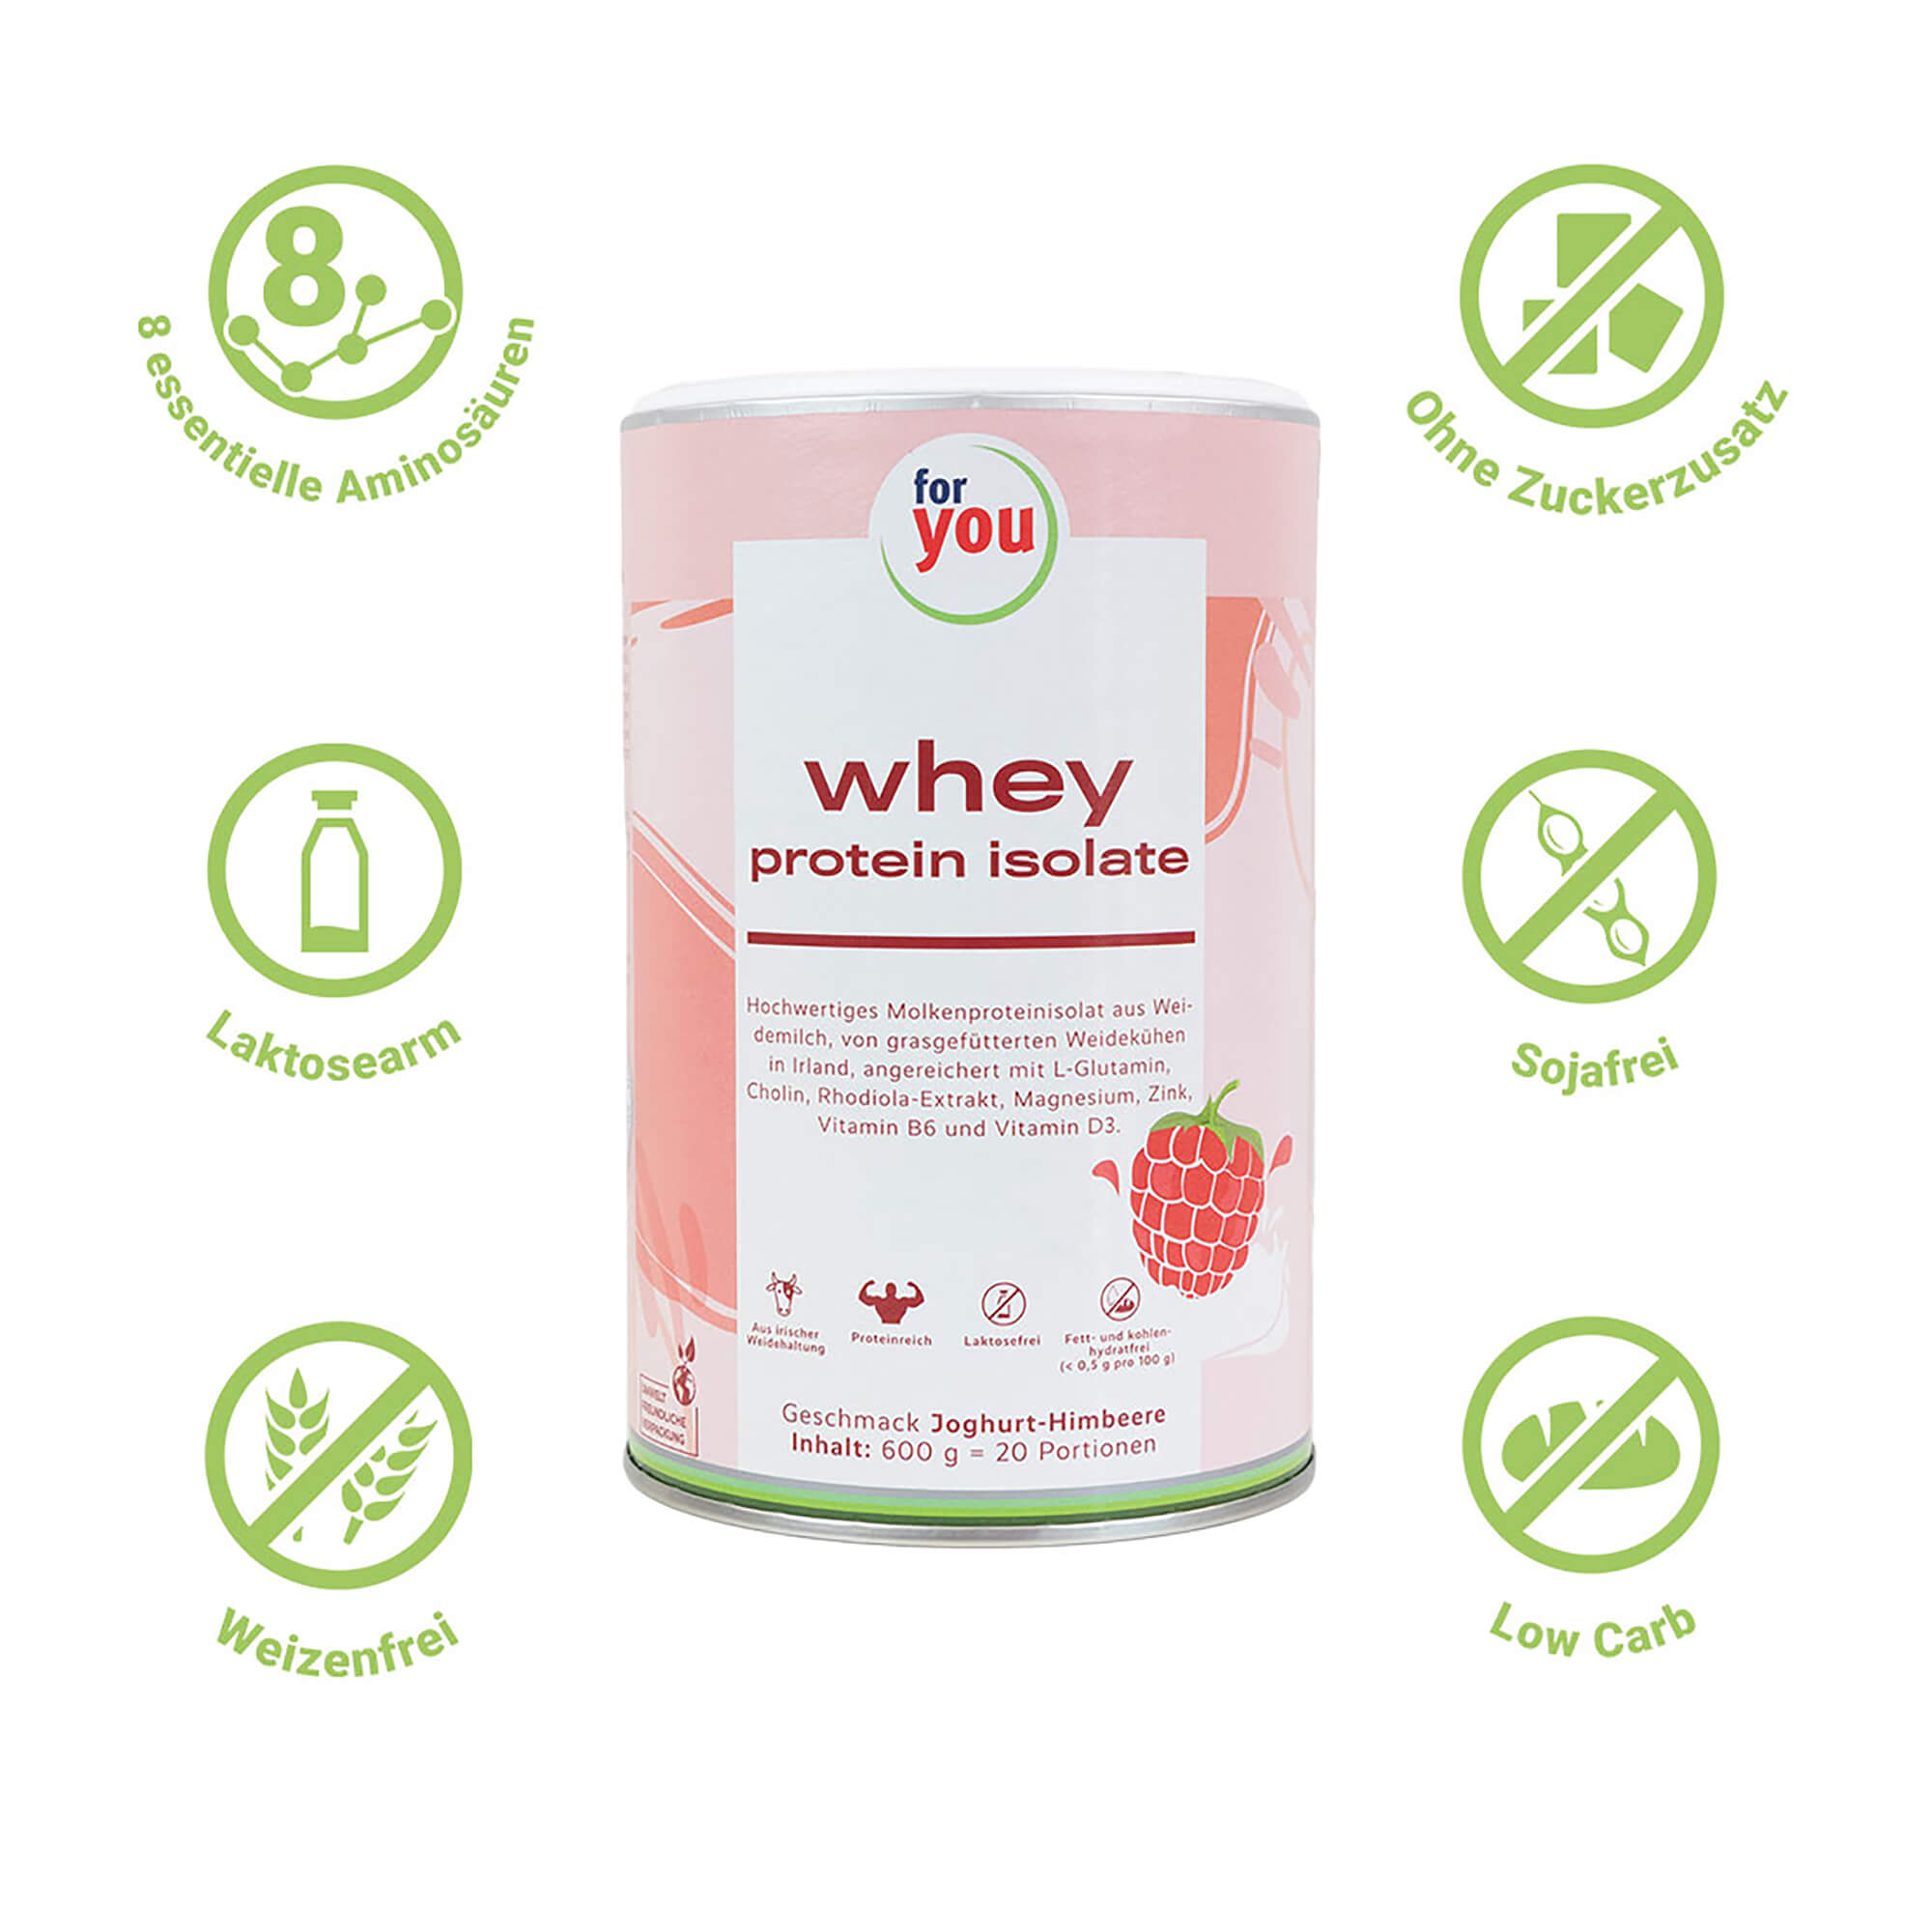 For you whey protein isolate Joghurt-Himbeere Pulver